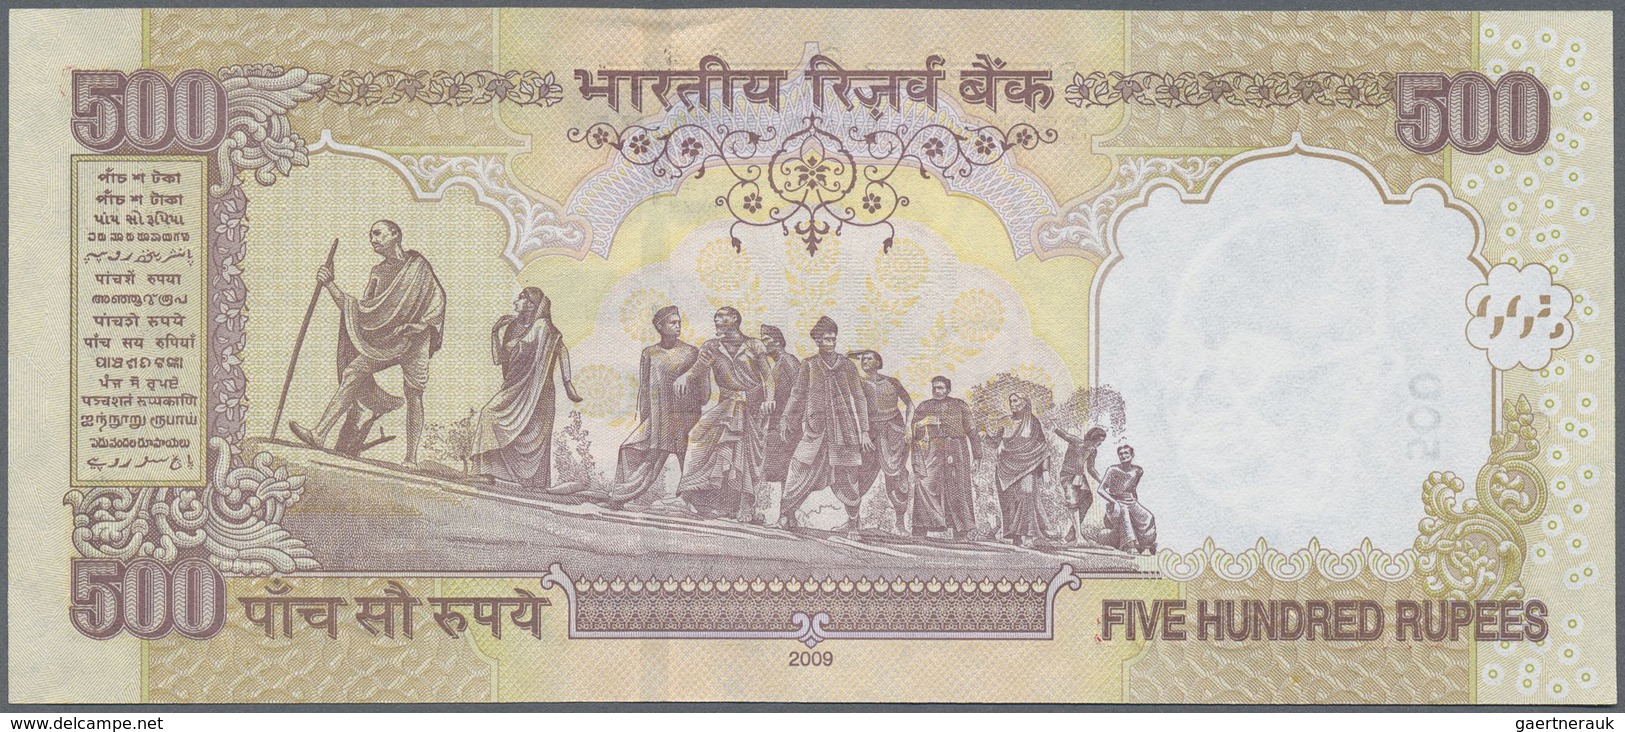 India / Indien: 10, 20, 50, 100, 500, 1000 Rupees, all first prefix 0AA 000008, P.95-100 in UNC (6 p